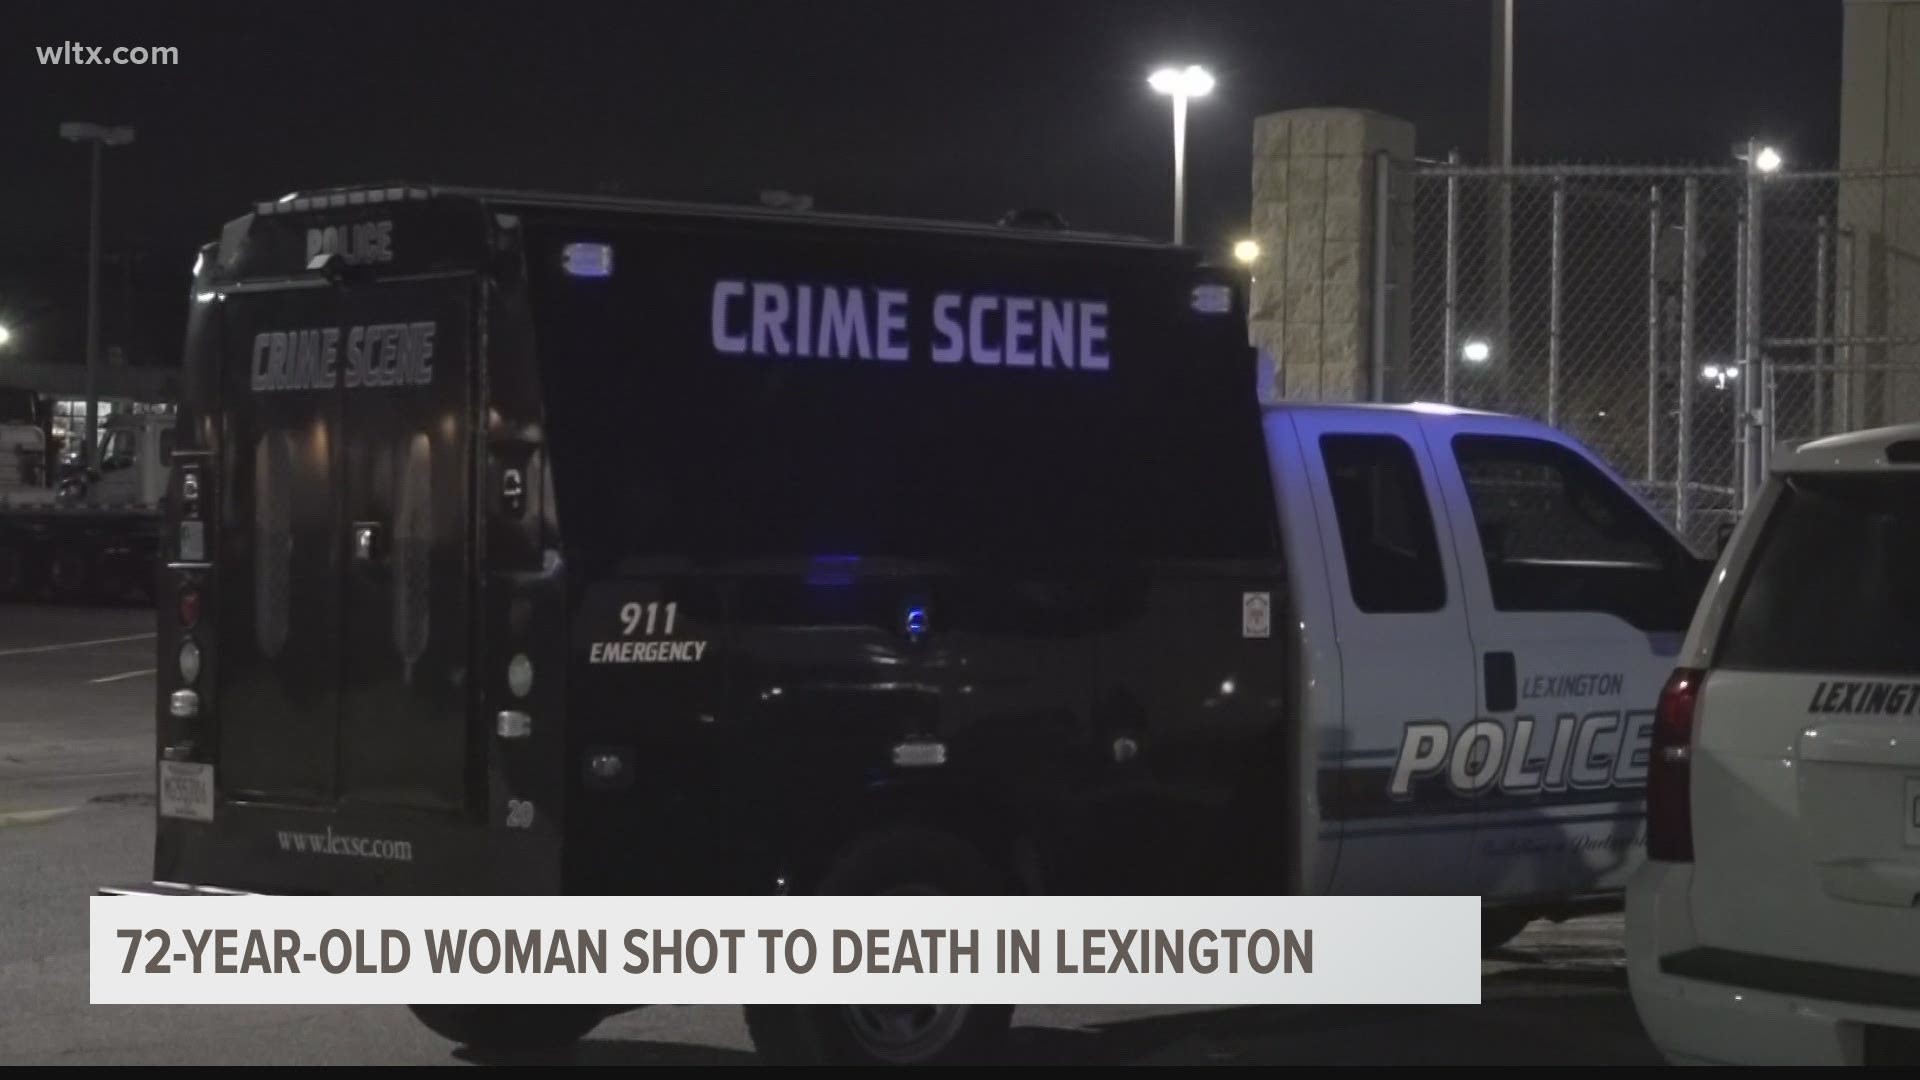 A 72-year-old woman has died after being shot in the face during an argument on Main Street in Lexington, according to police.